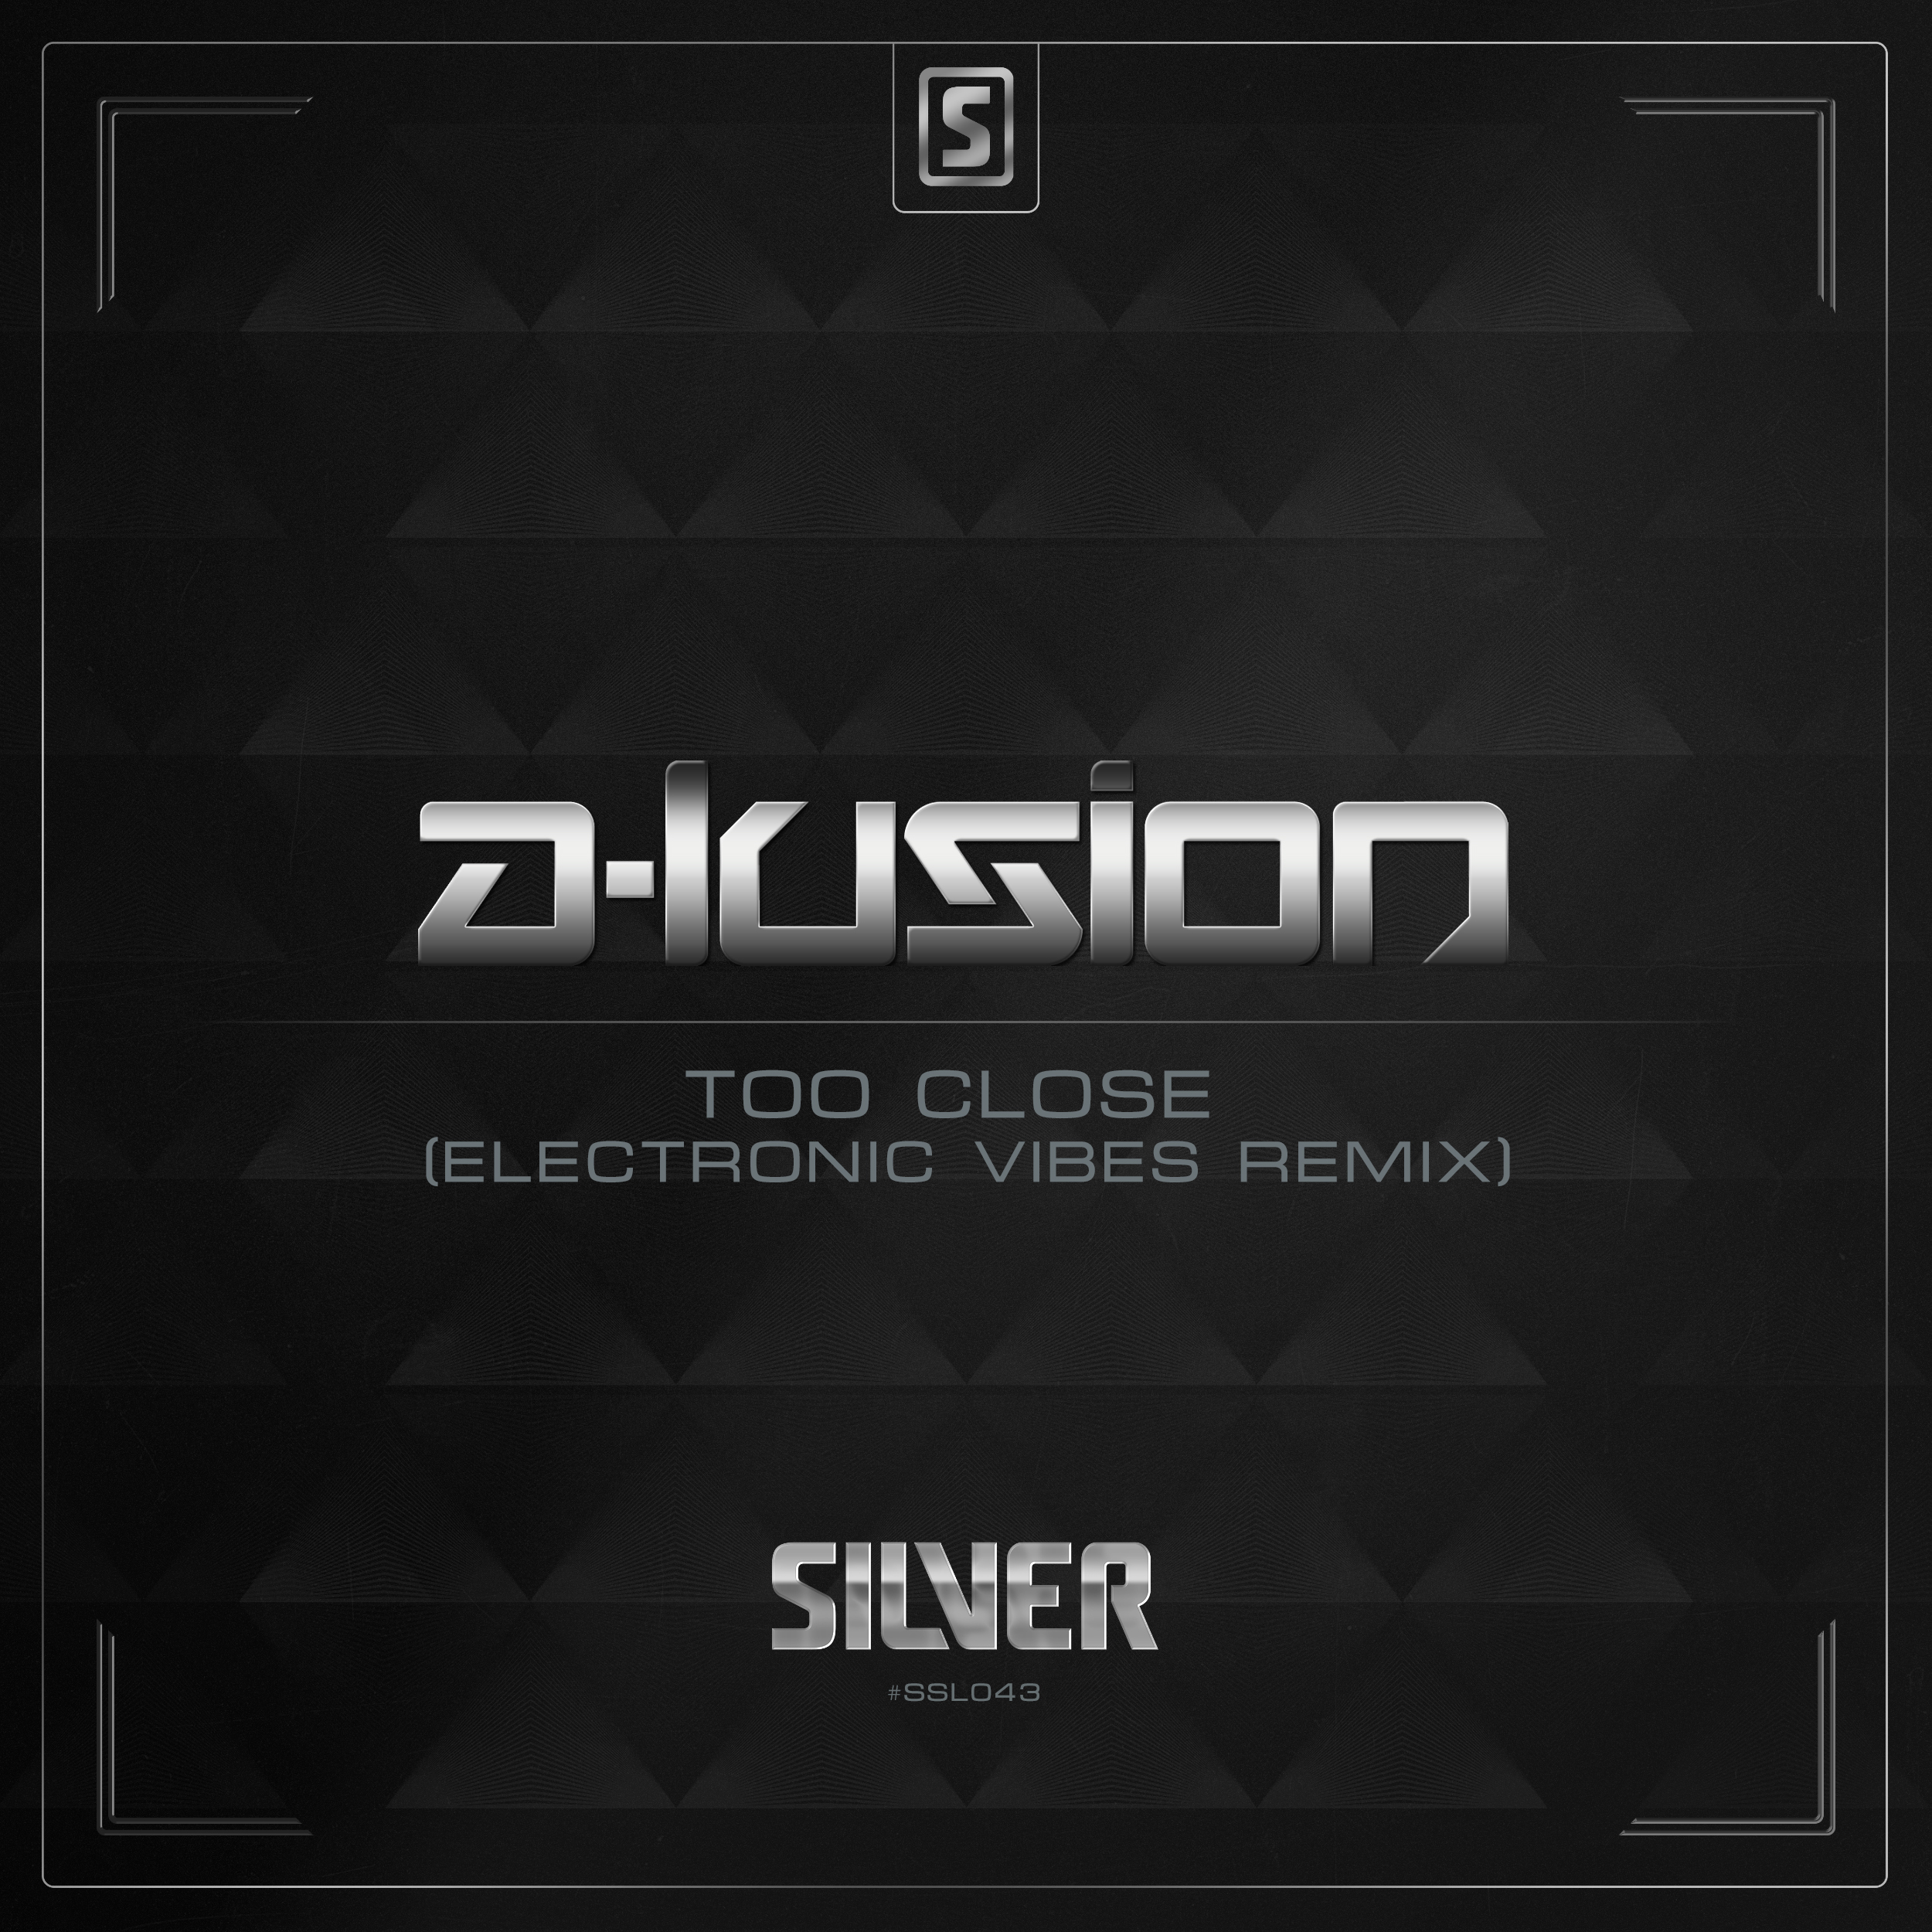 A-Lusion - Too Close (Electronic Vibes Remix) [SCANTRAXX SILVER] SSL043